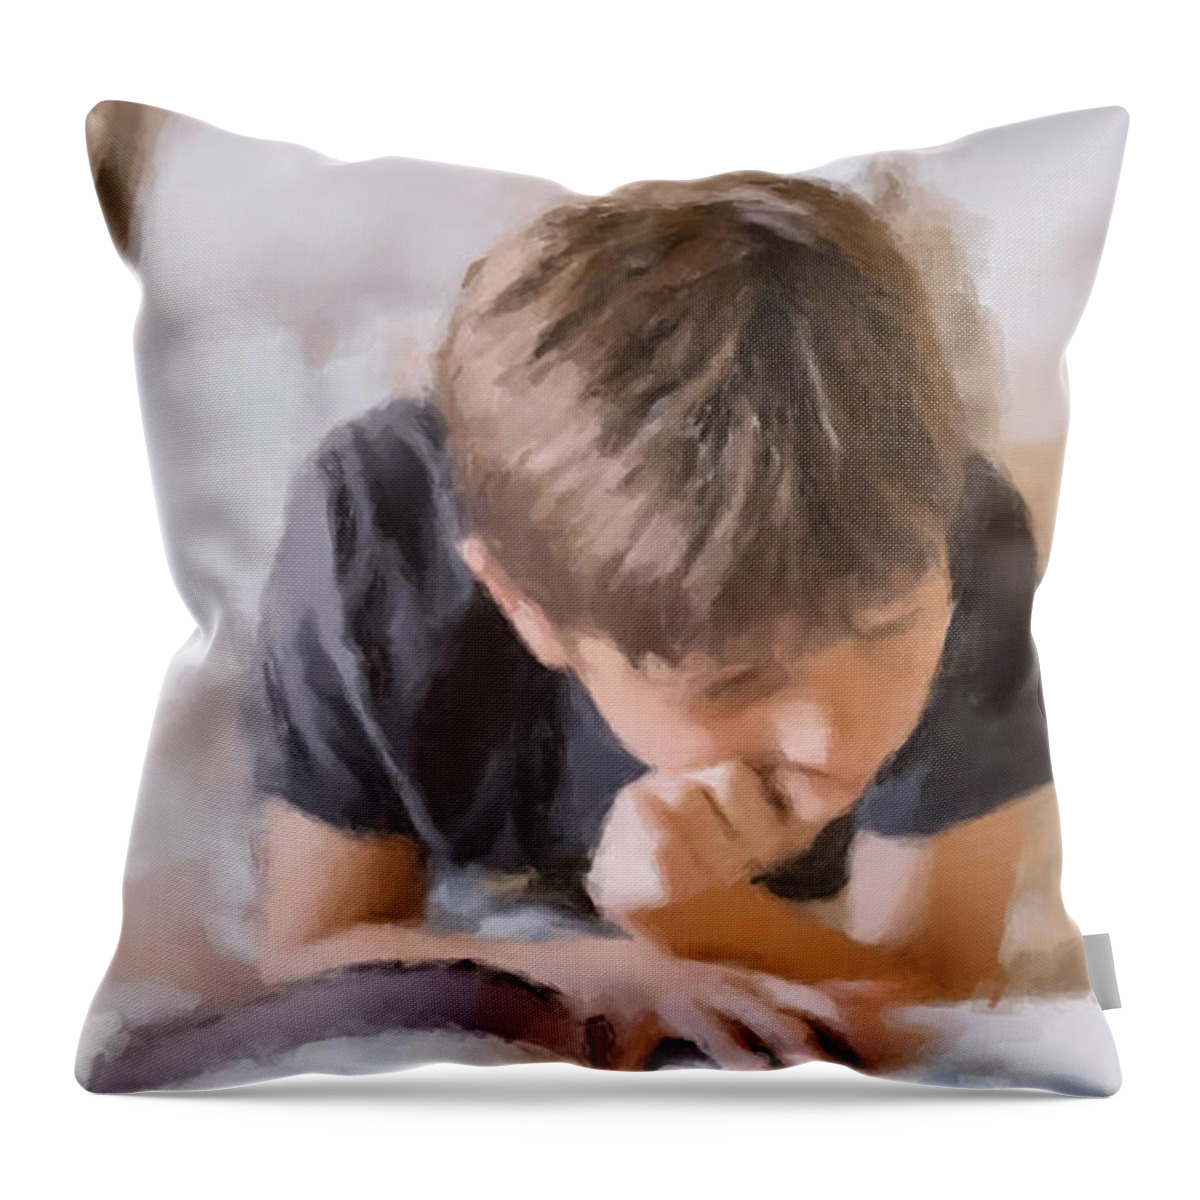 Reading Throw Pillow featuring the painting Boy Studying by Gary Arnold